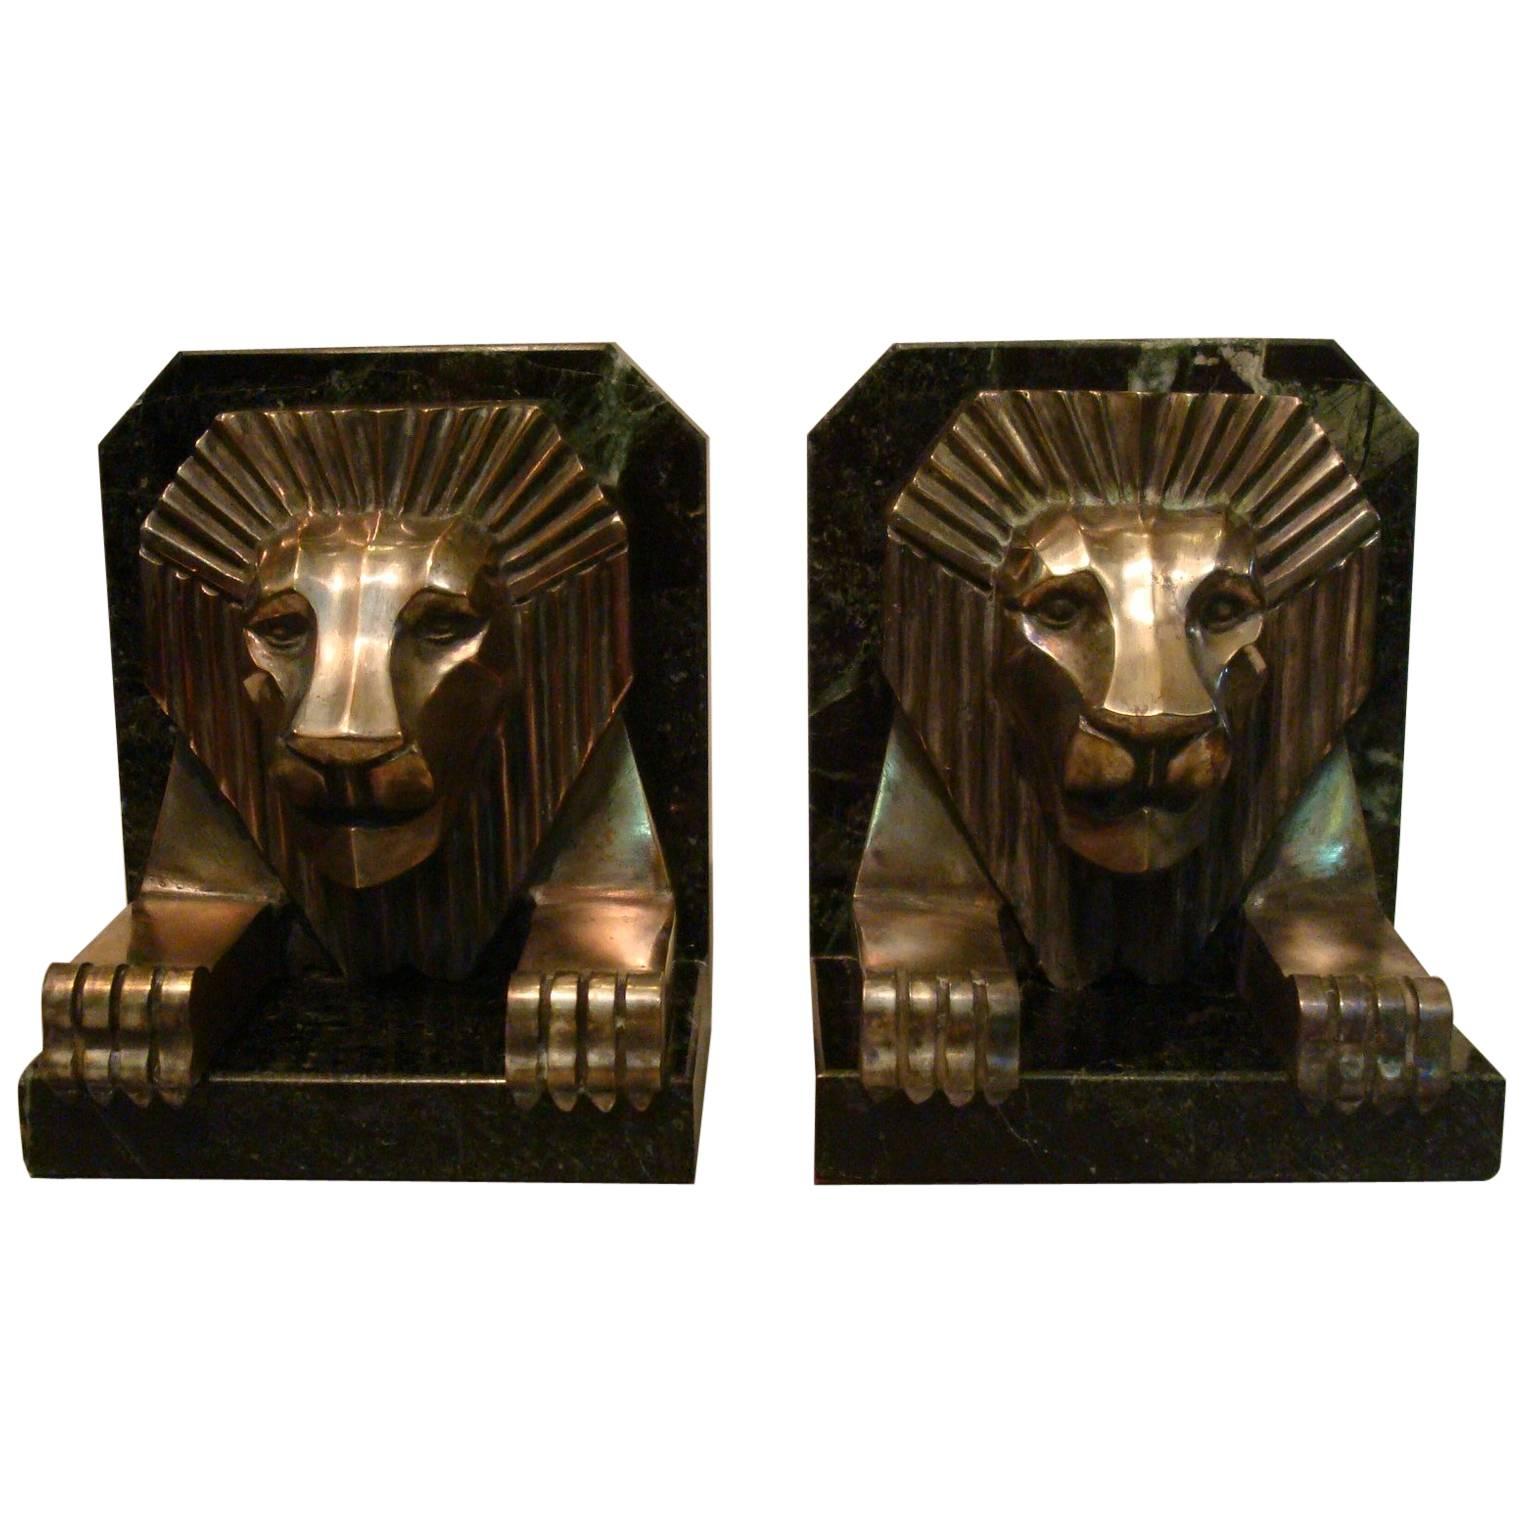 Art Deco Bronze and Marble Lion Bookends, Jacques Cartier, France, 1925